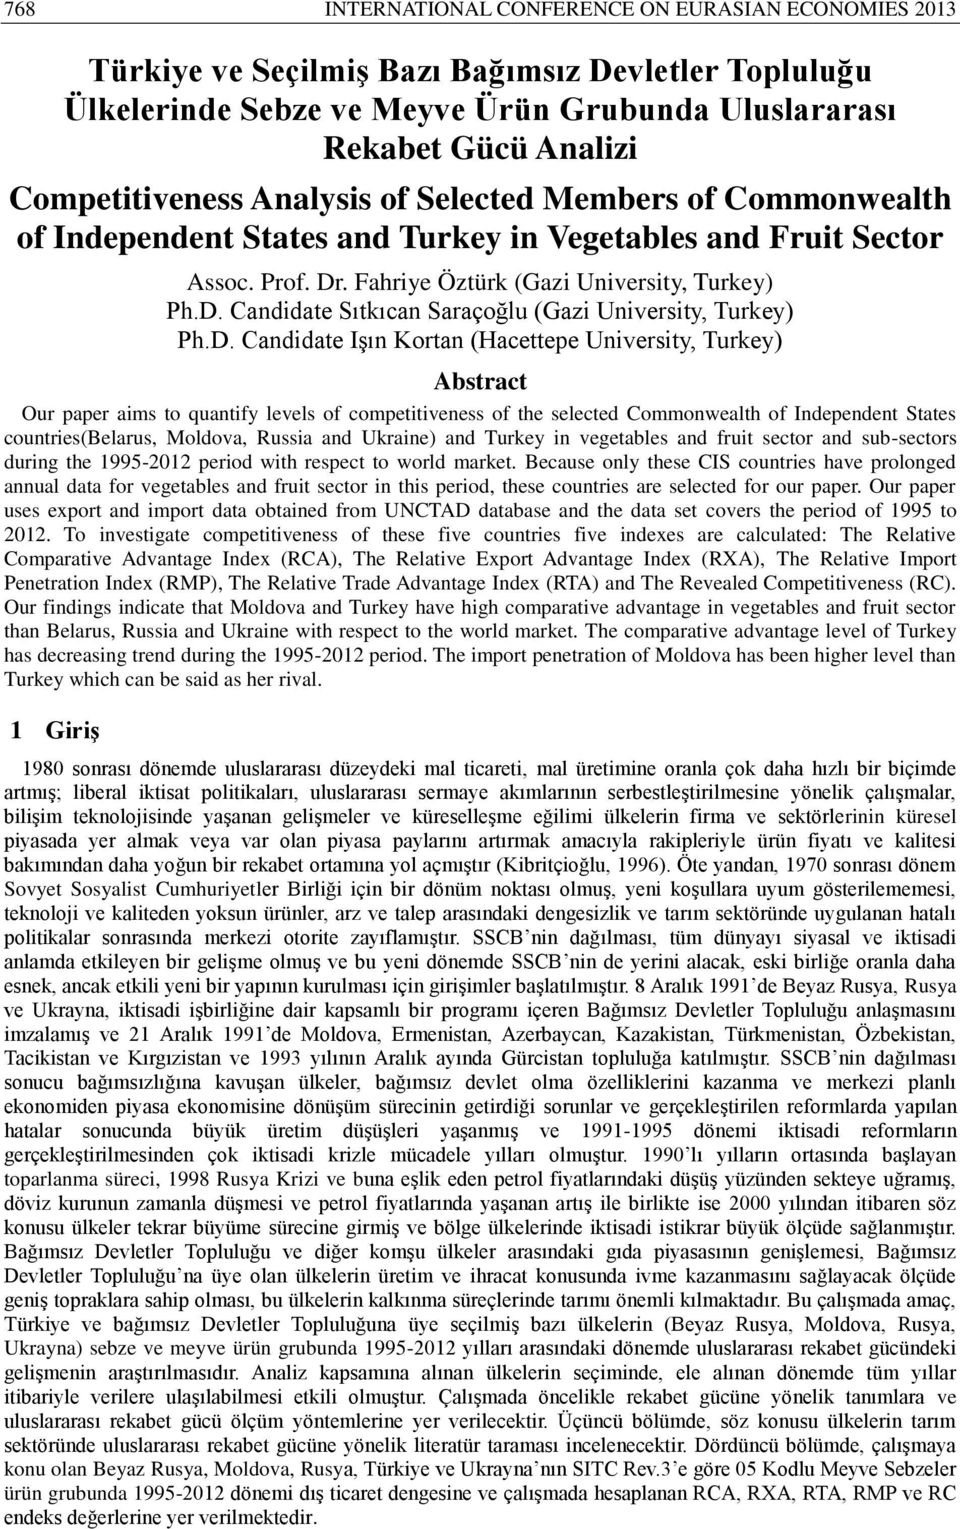 D. Candidate Işın Kortan (Hacettepe University, Turkey) Abstract Our paper aims to quantify levels of competitiveness of the selected Commonwealth of Independent States countries(belarus, Moldova,